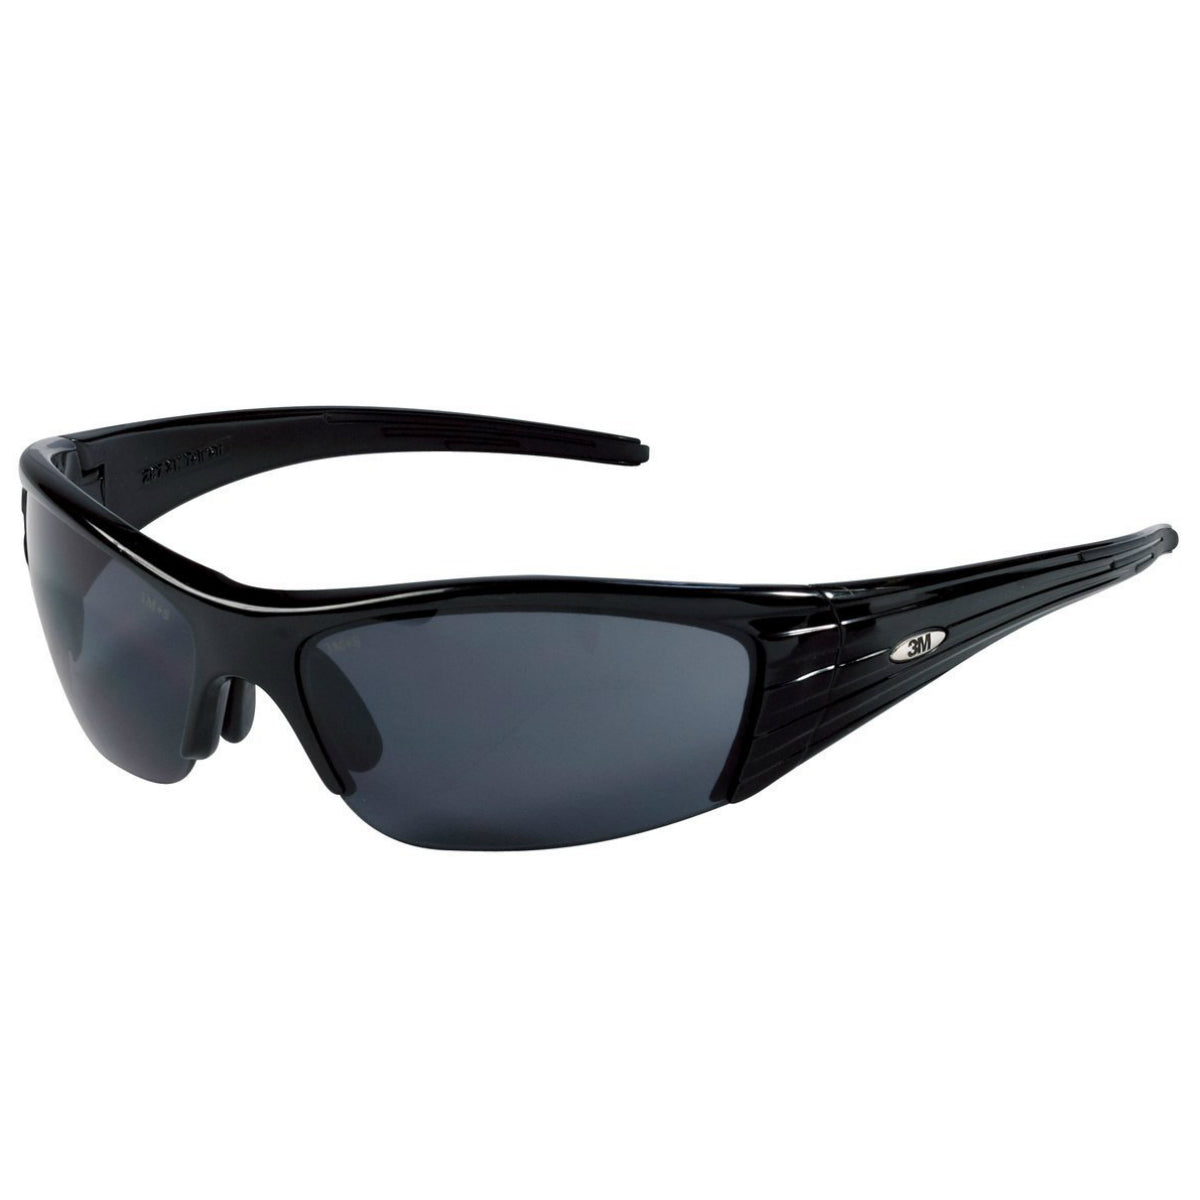 3M 90879-80025 Fuel X2P Polarized Safety Glasses, Gray Lens